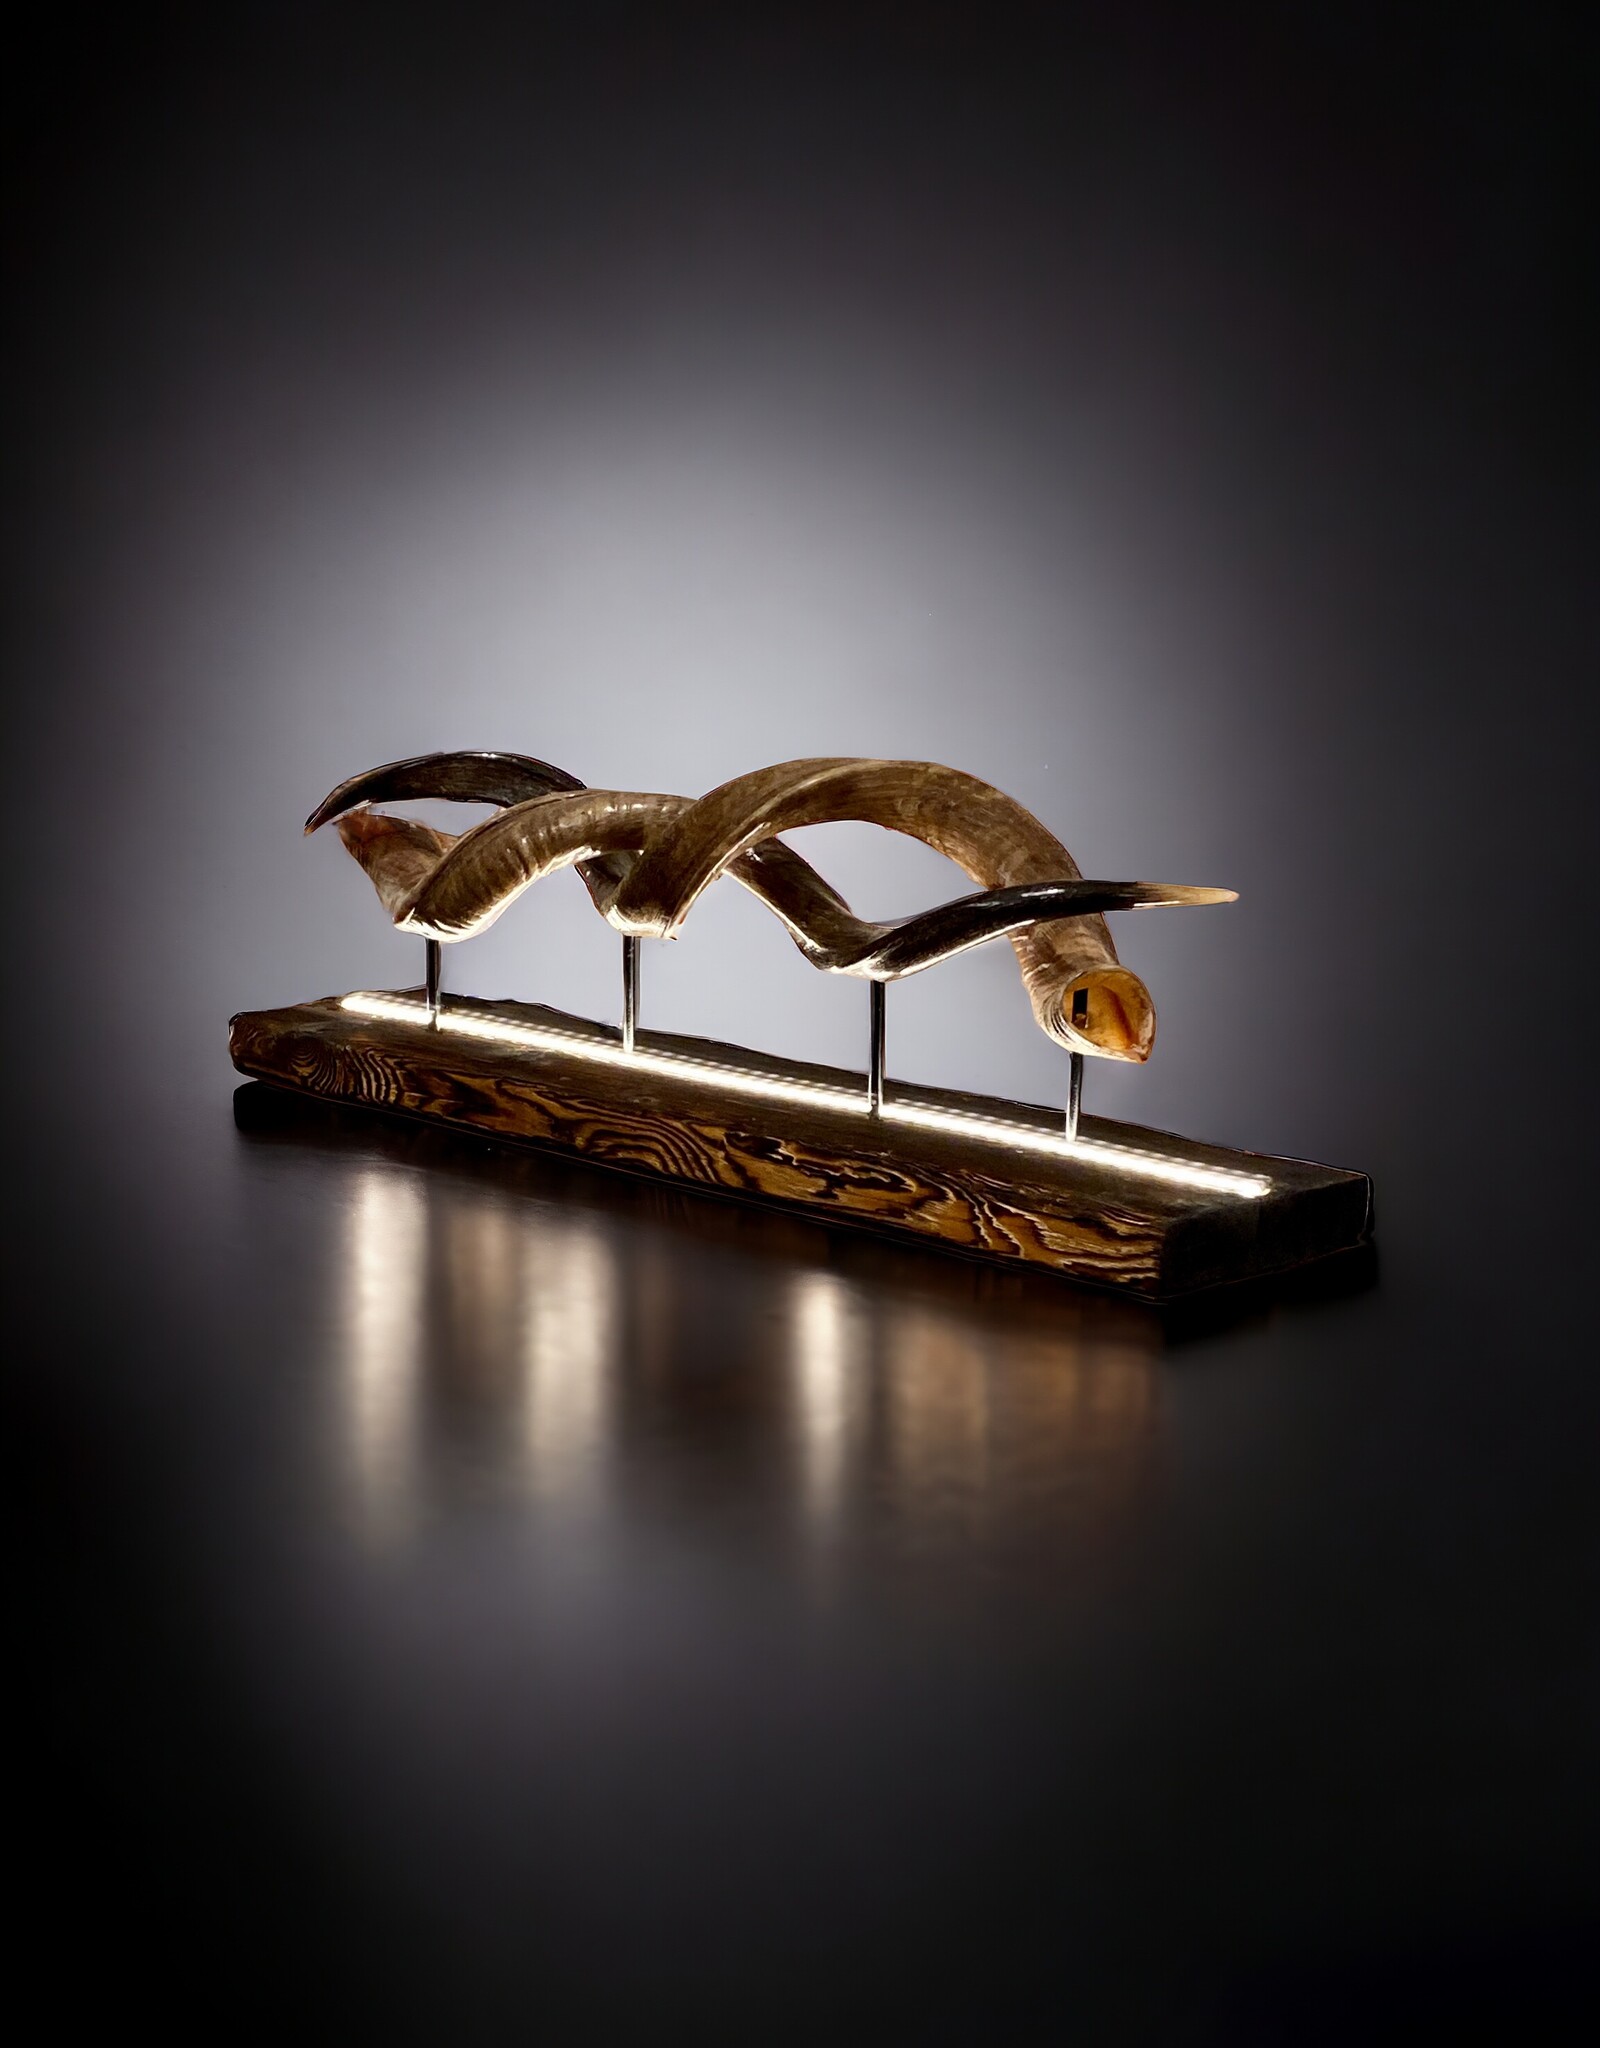 Handcrafted Kudu Horn Table Sculpture – Unique Exotic Design with LED Lighting